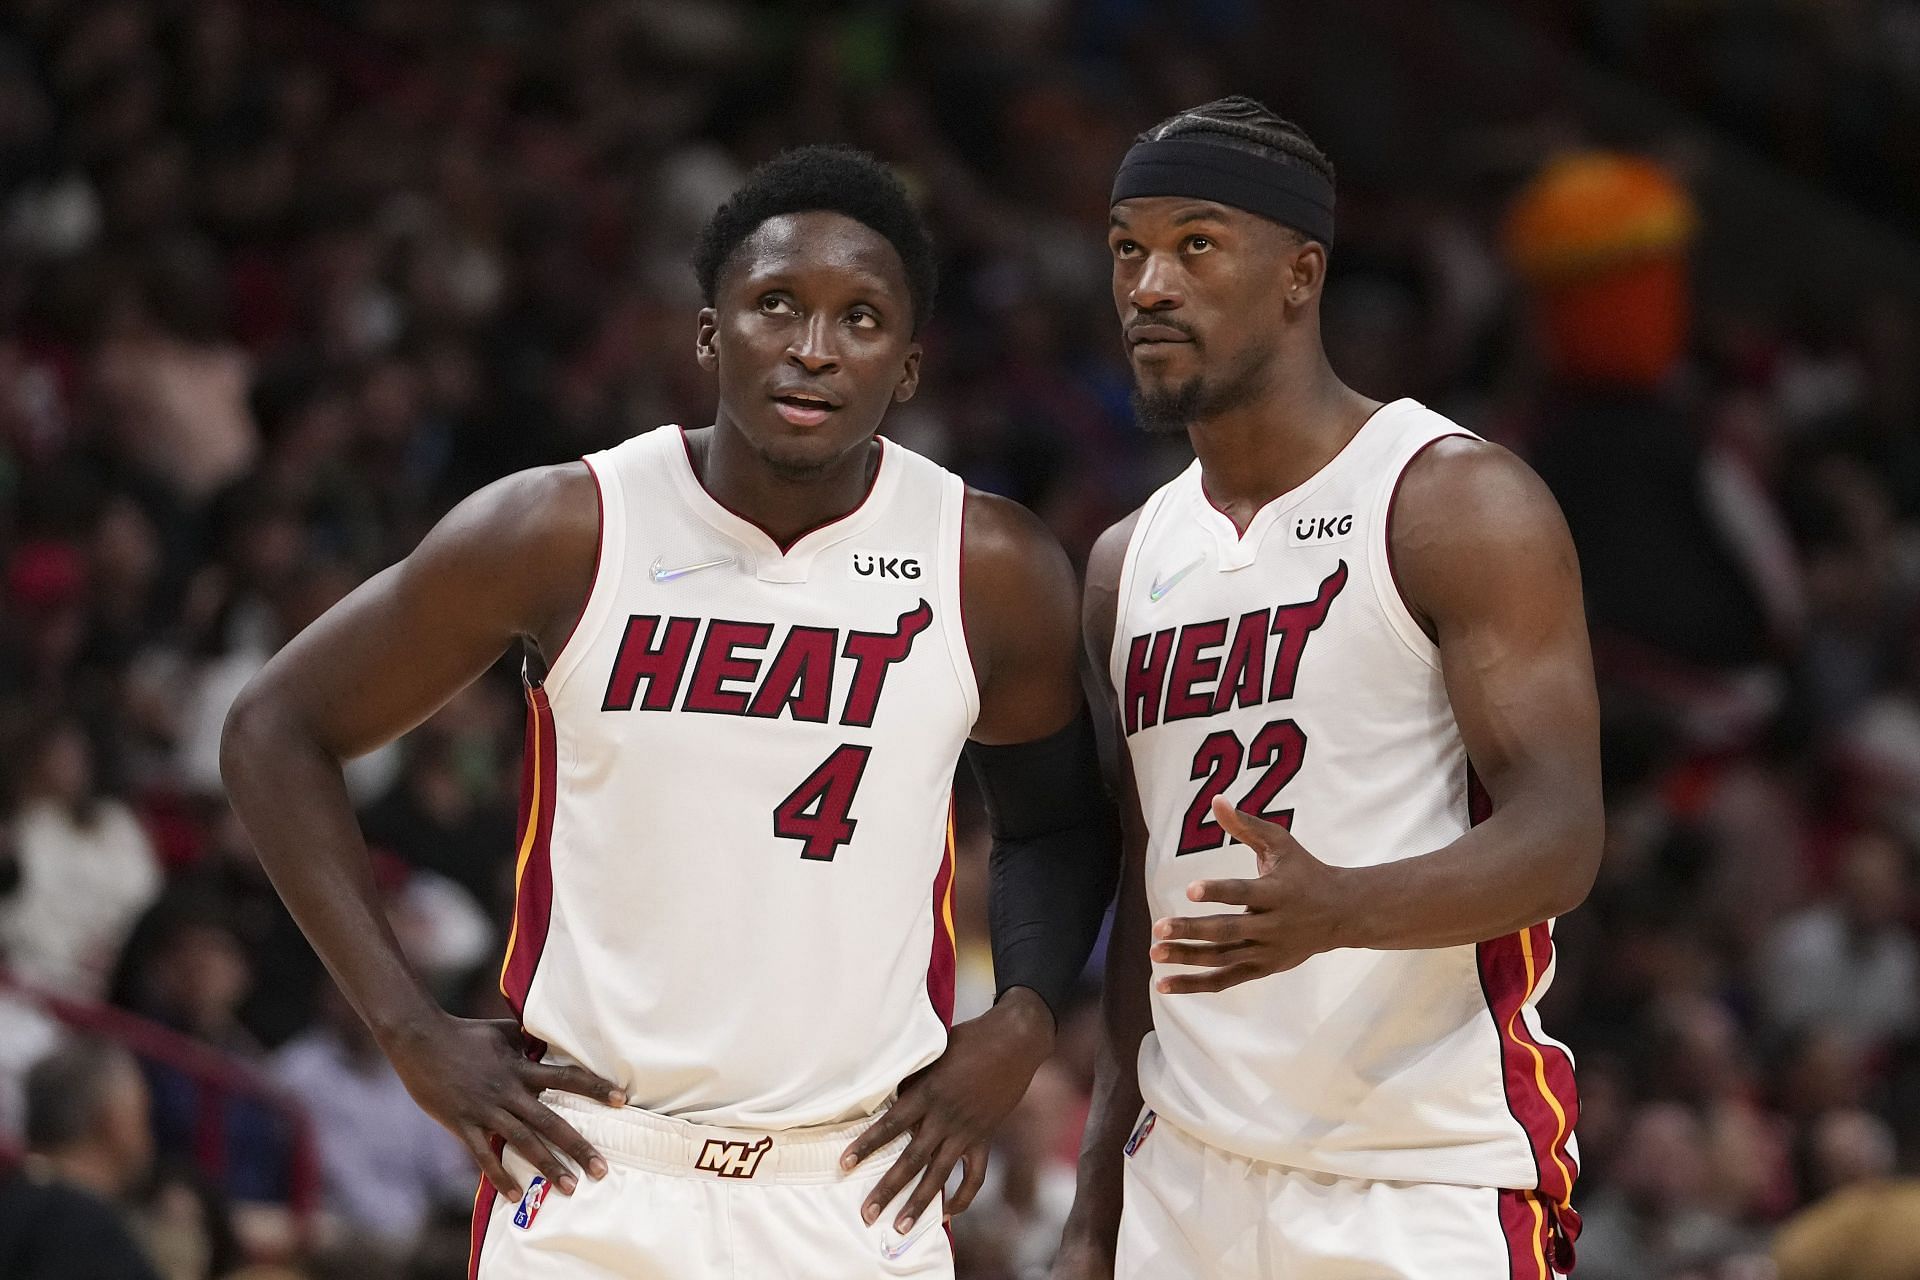 Jimmy Butler #22 and Victor Oladipo #4 of the Miami Heat talk during a free-throw attempt in the second half against the Golden State Warriors at FTX Arena on March 23, 2022 in Miami, Florida.